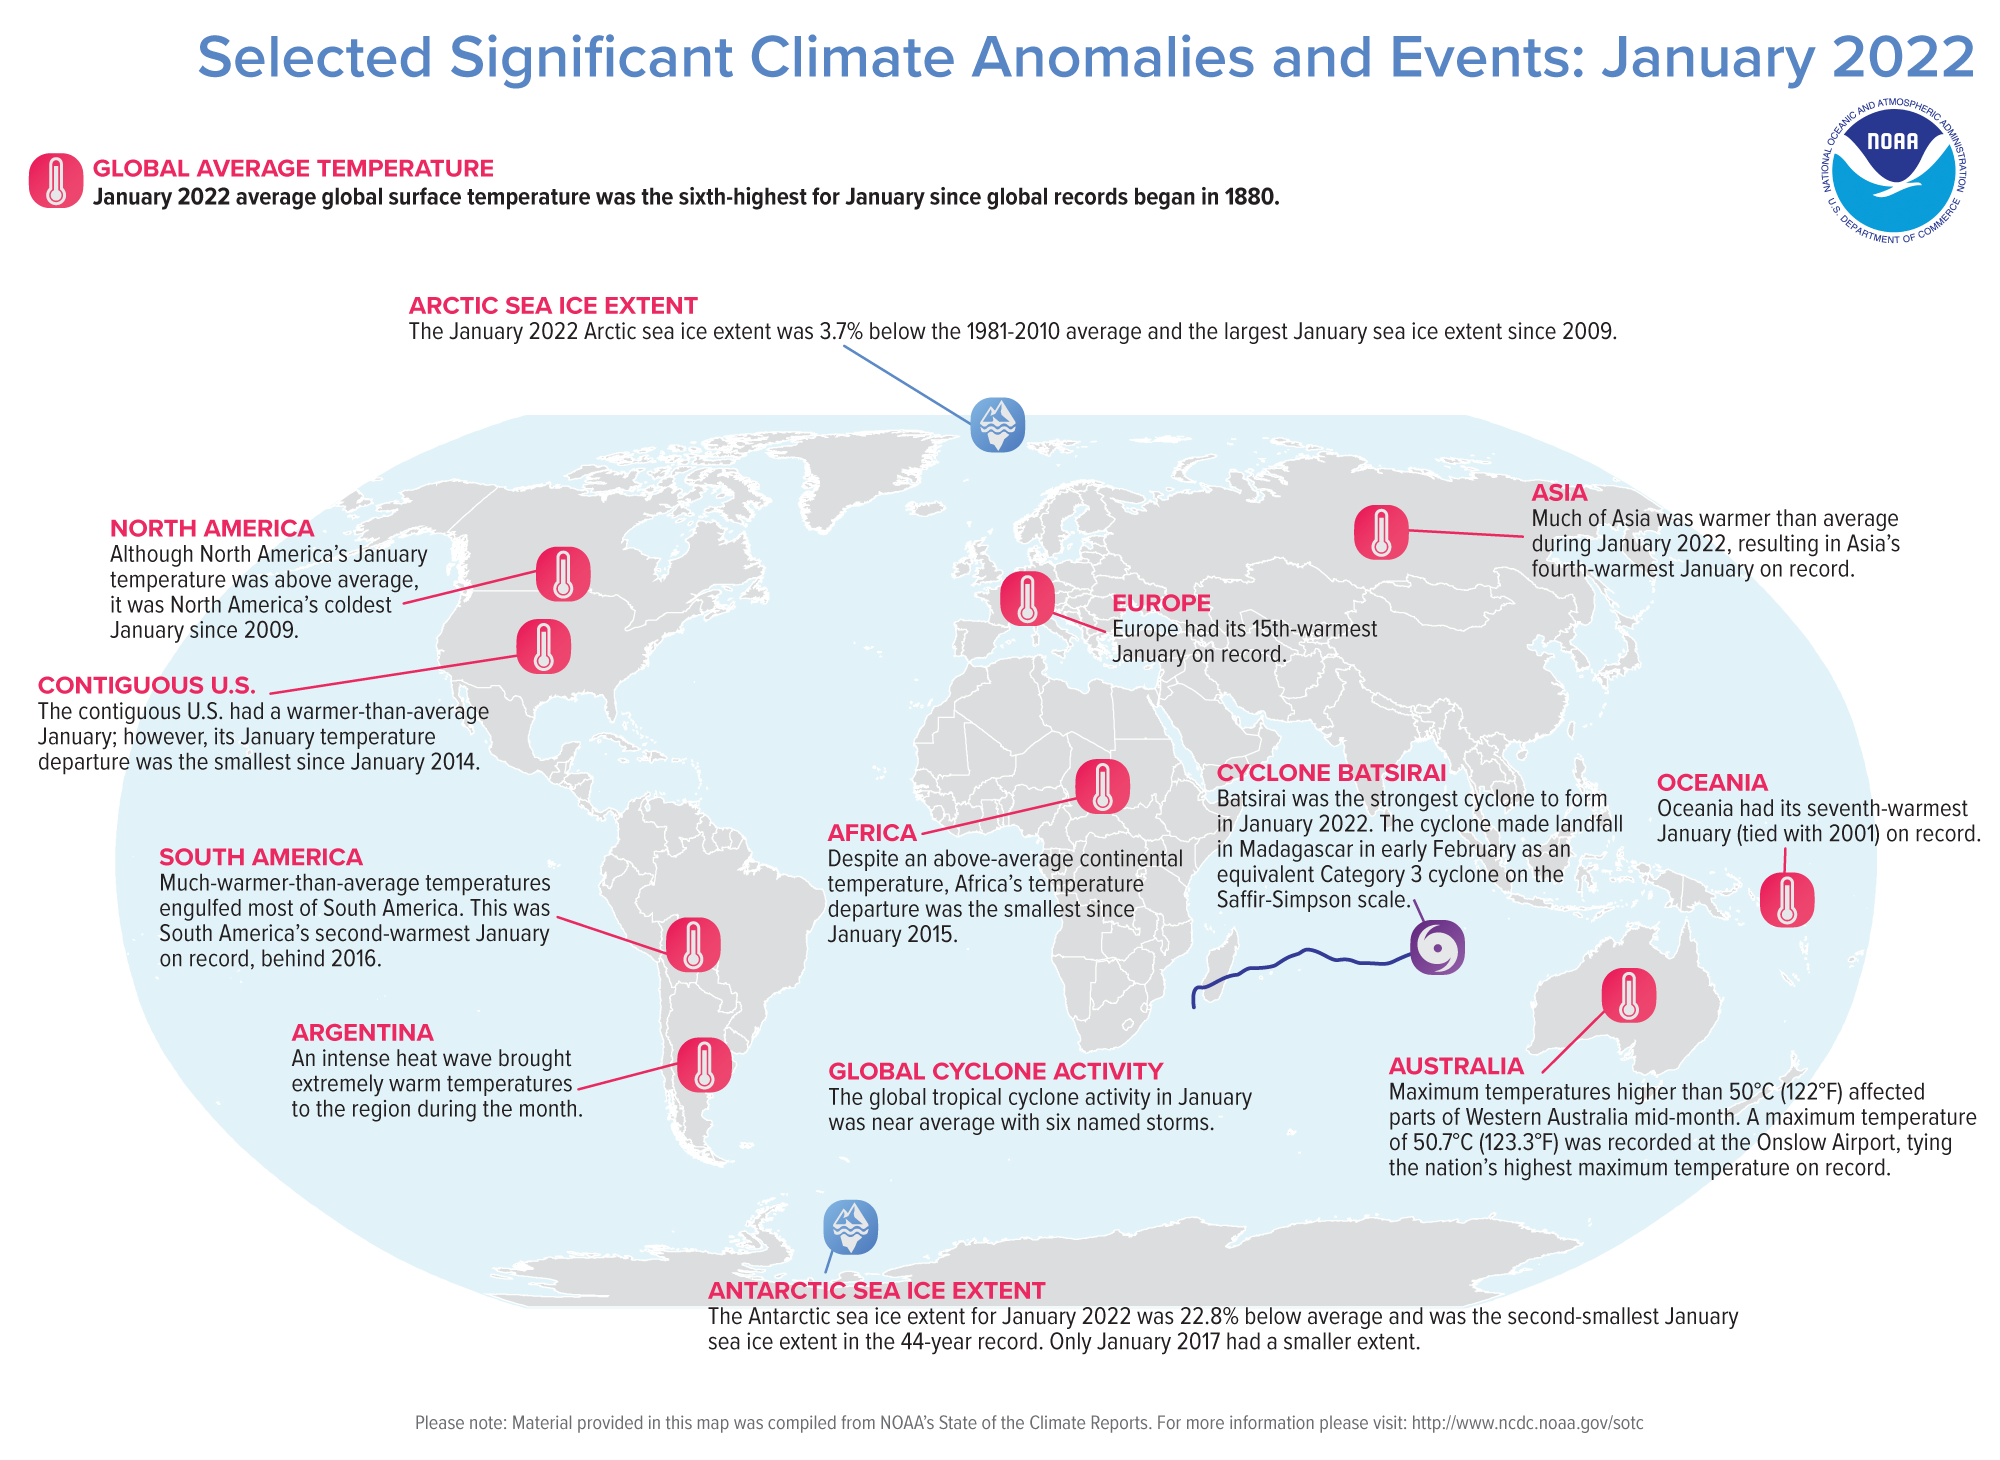 A map of the world plotted with some of the most significant climate events that occurred during January 2022.